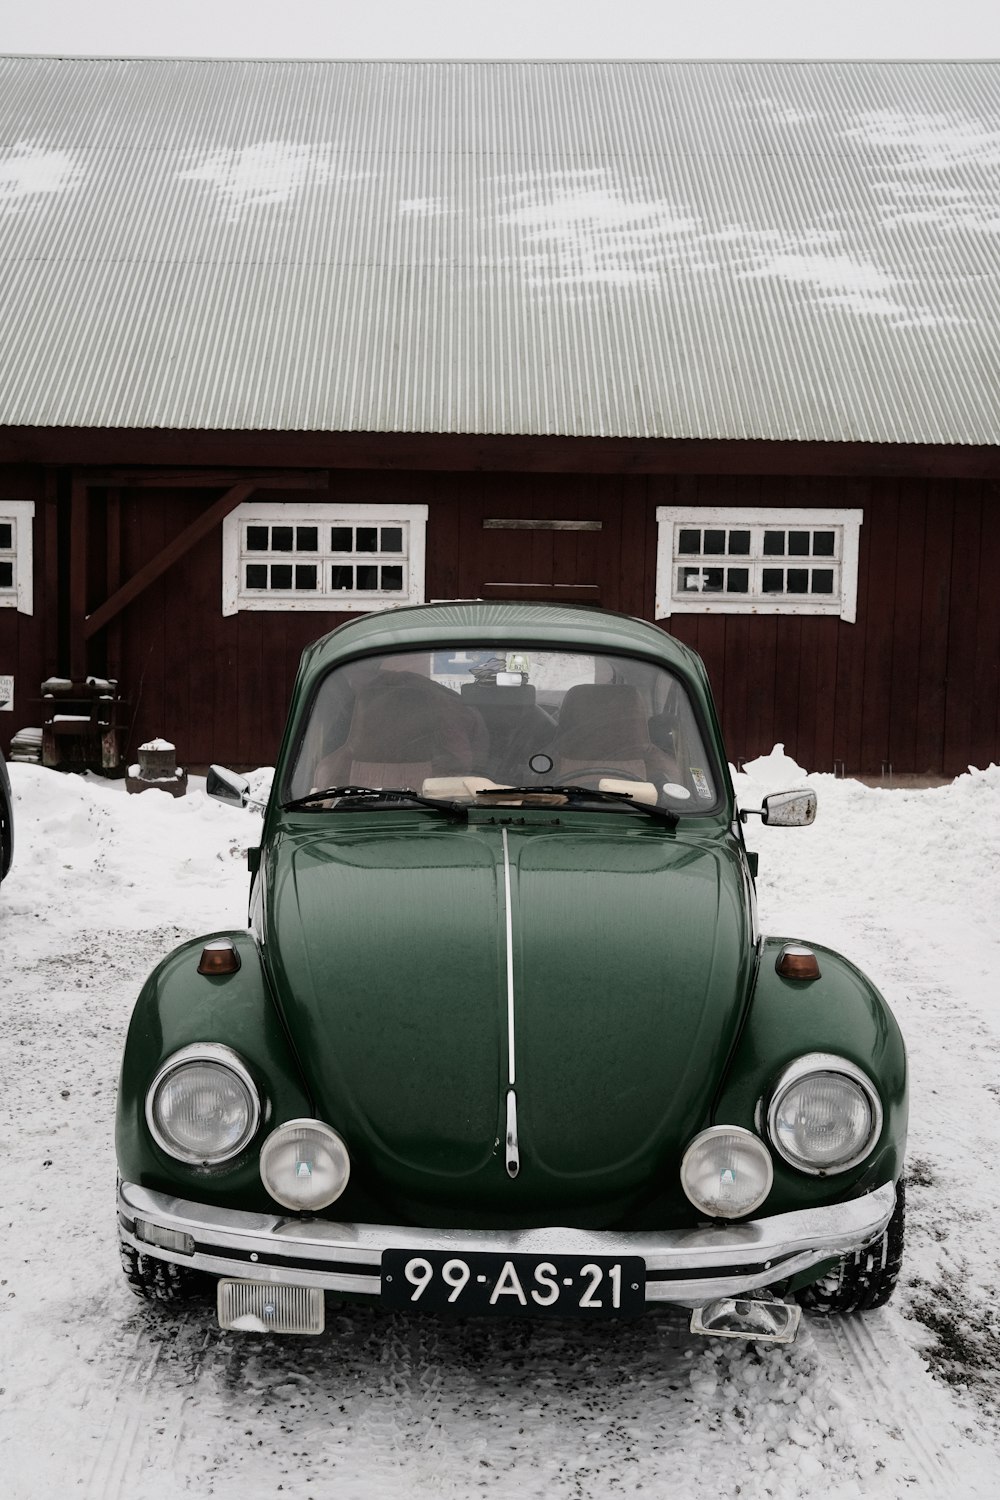 a green car parked in front of a barn